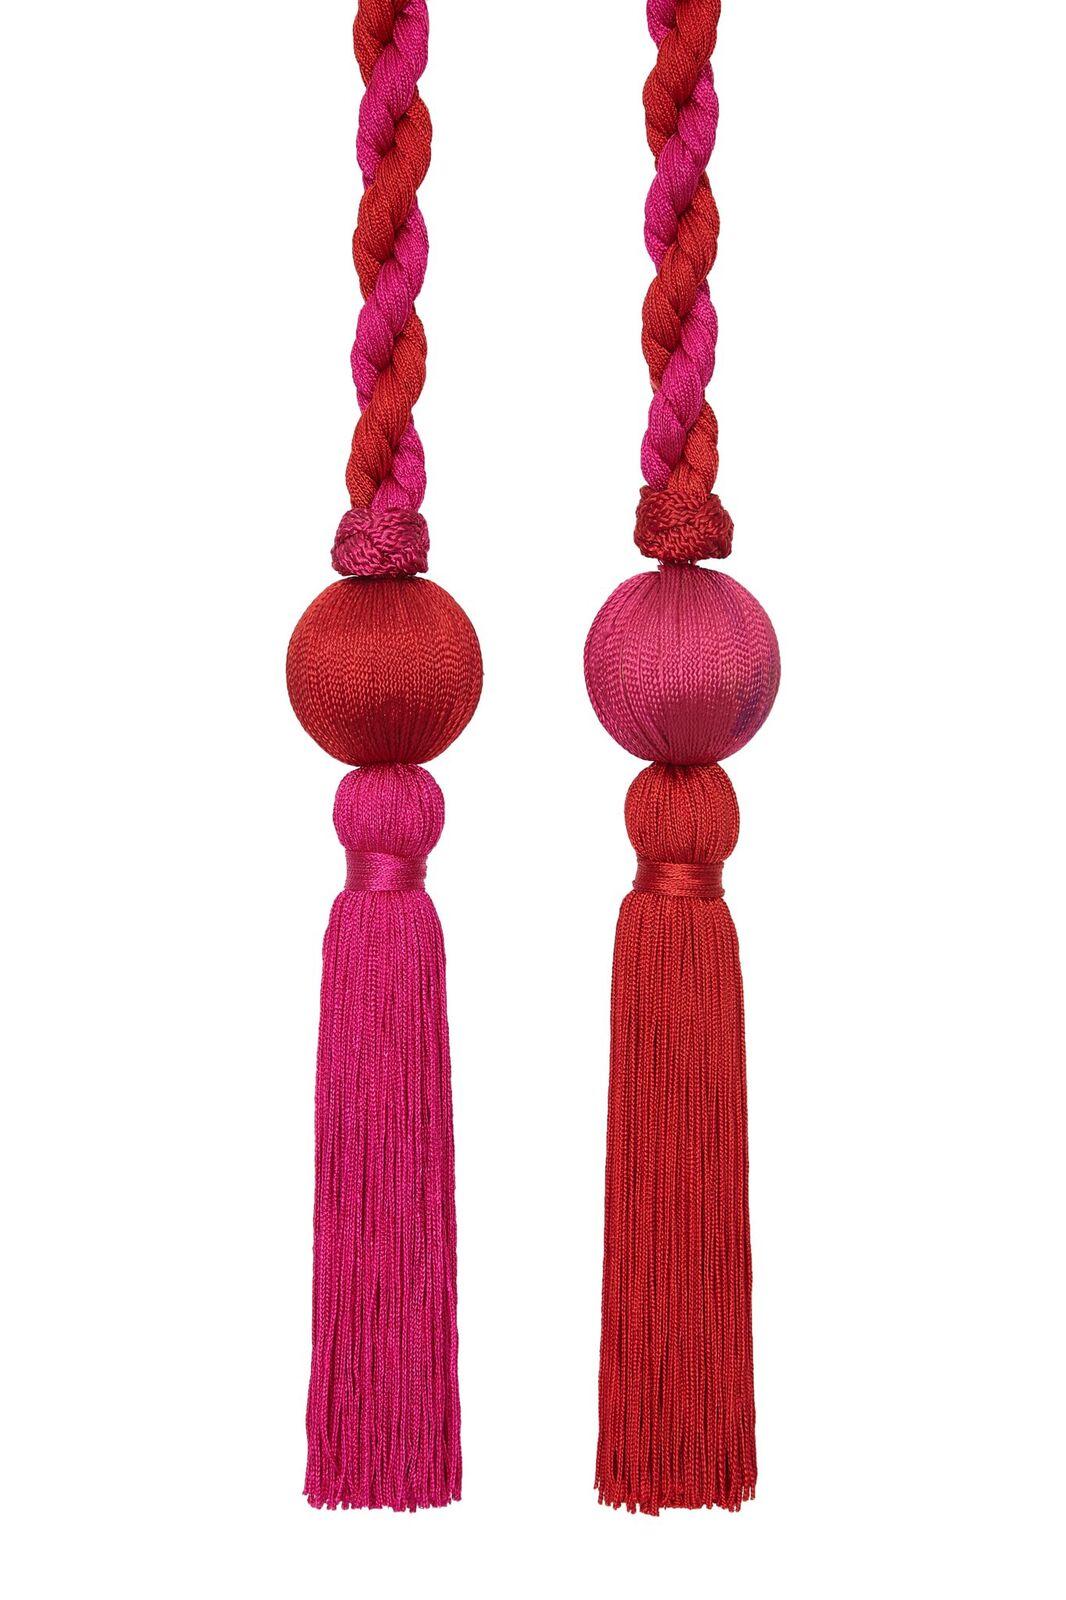 This desirable 1990s Yves Saint Laurent (without label) Moroccan style tassel belt in deep vermillion and fuchsia pink has an exotic charm and will effortlessly enliven even the plainest ensemble. Two tone braid is wound into a thick chord and